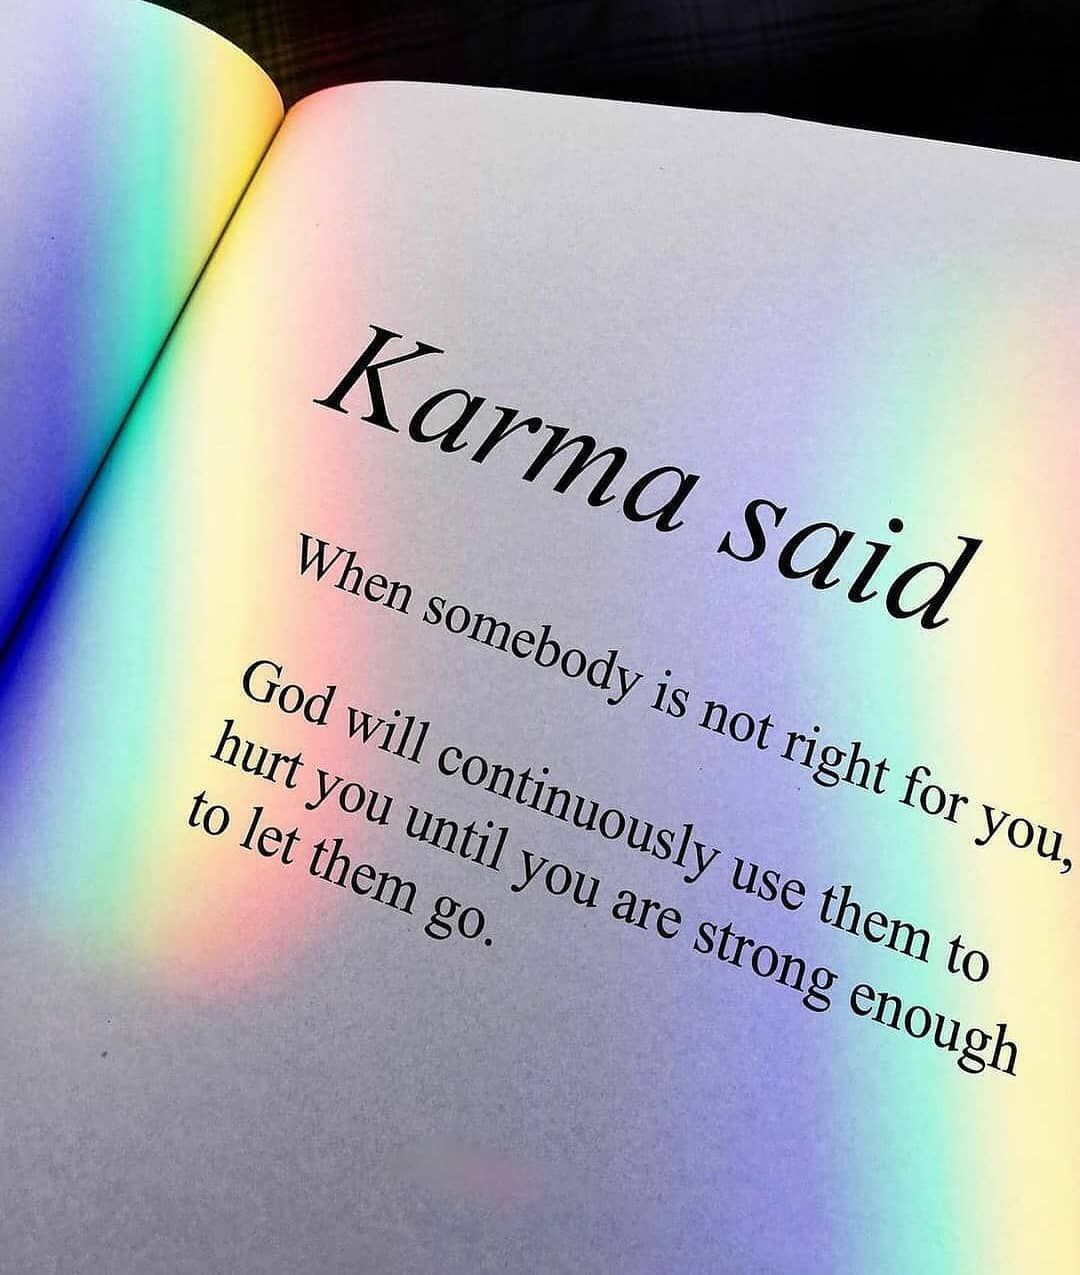 Karma said: When somebody is not right for yo God will continuously use them to hurt you until you are strong enough to let them go.